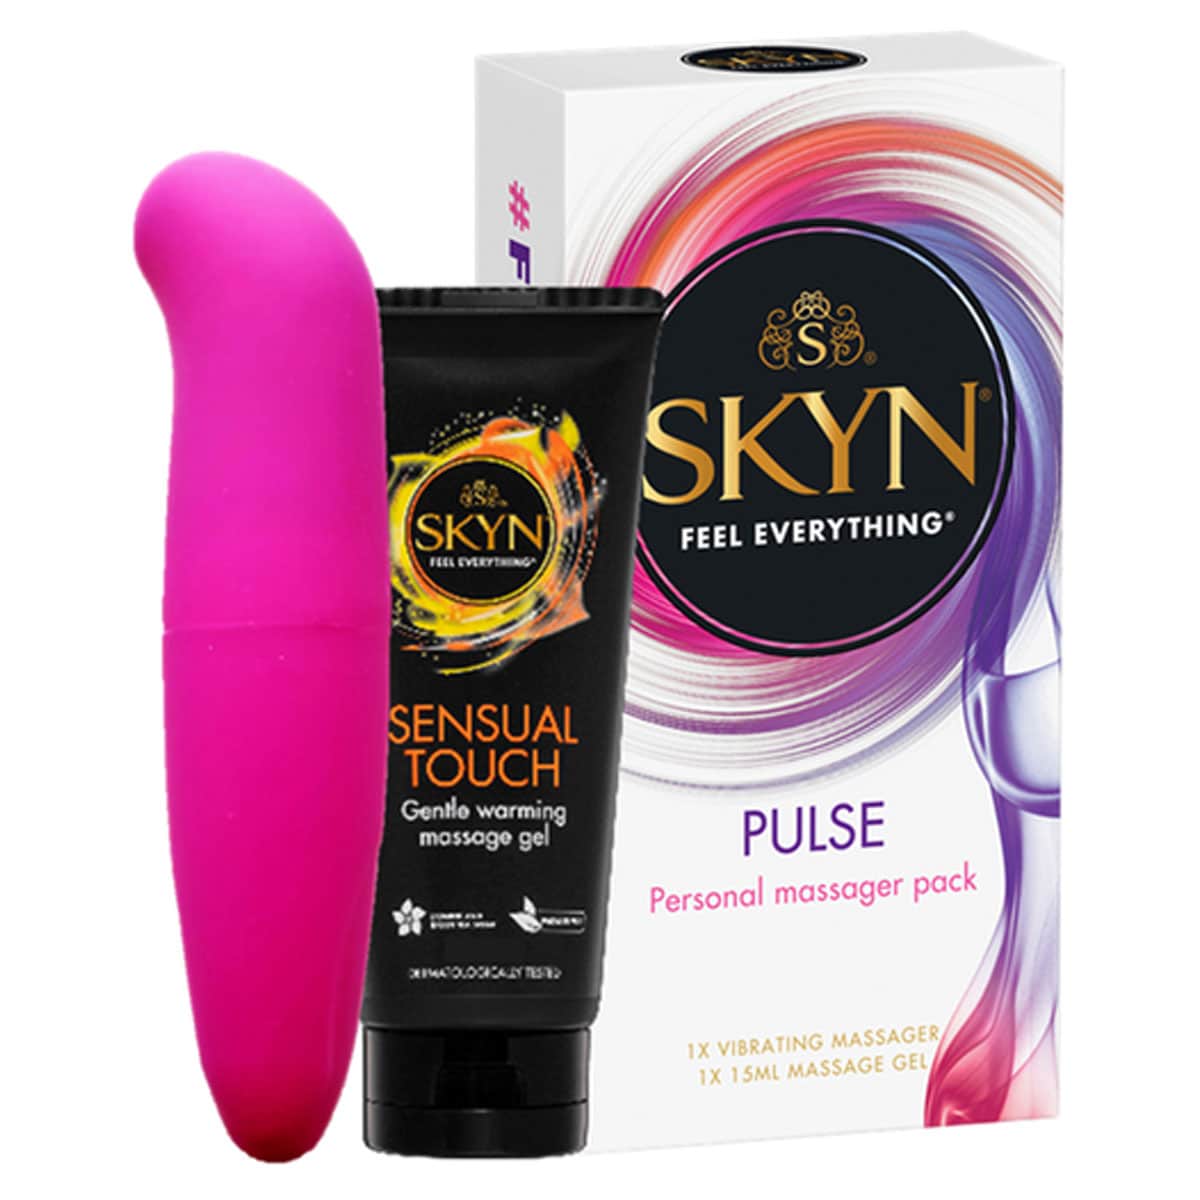 Skyn Pulse Personal Massager Pack